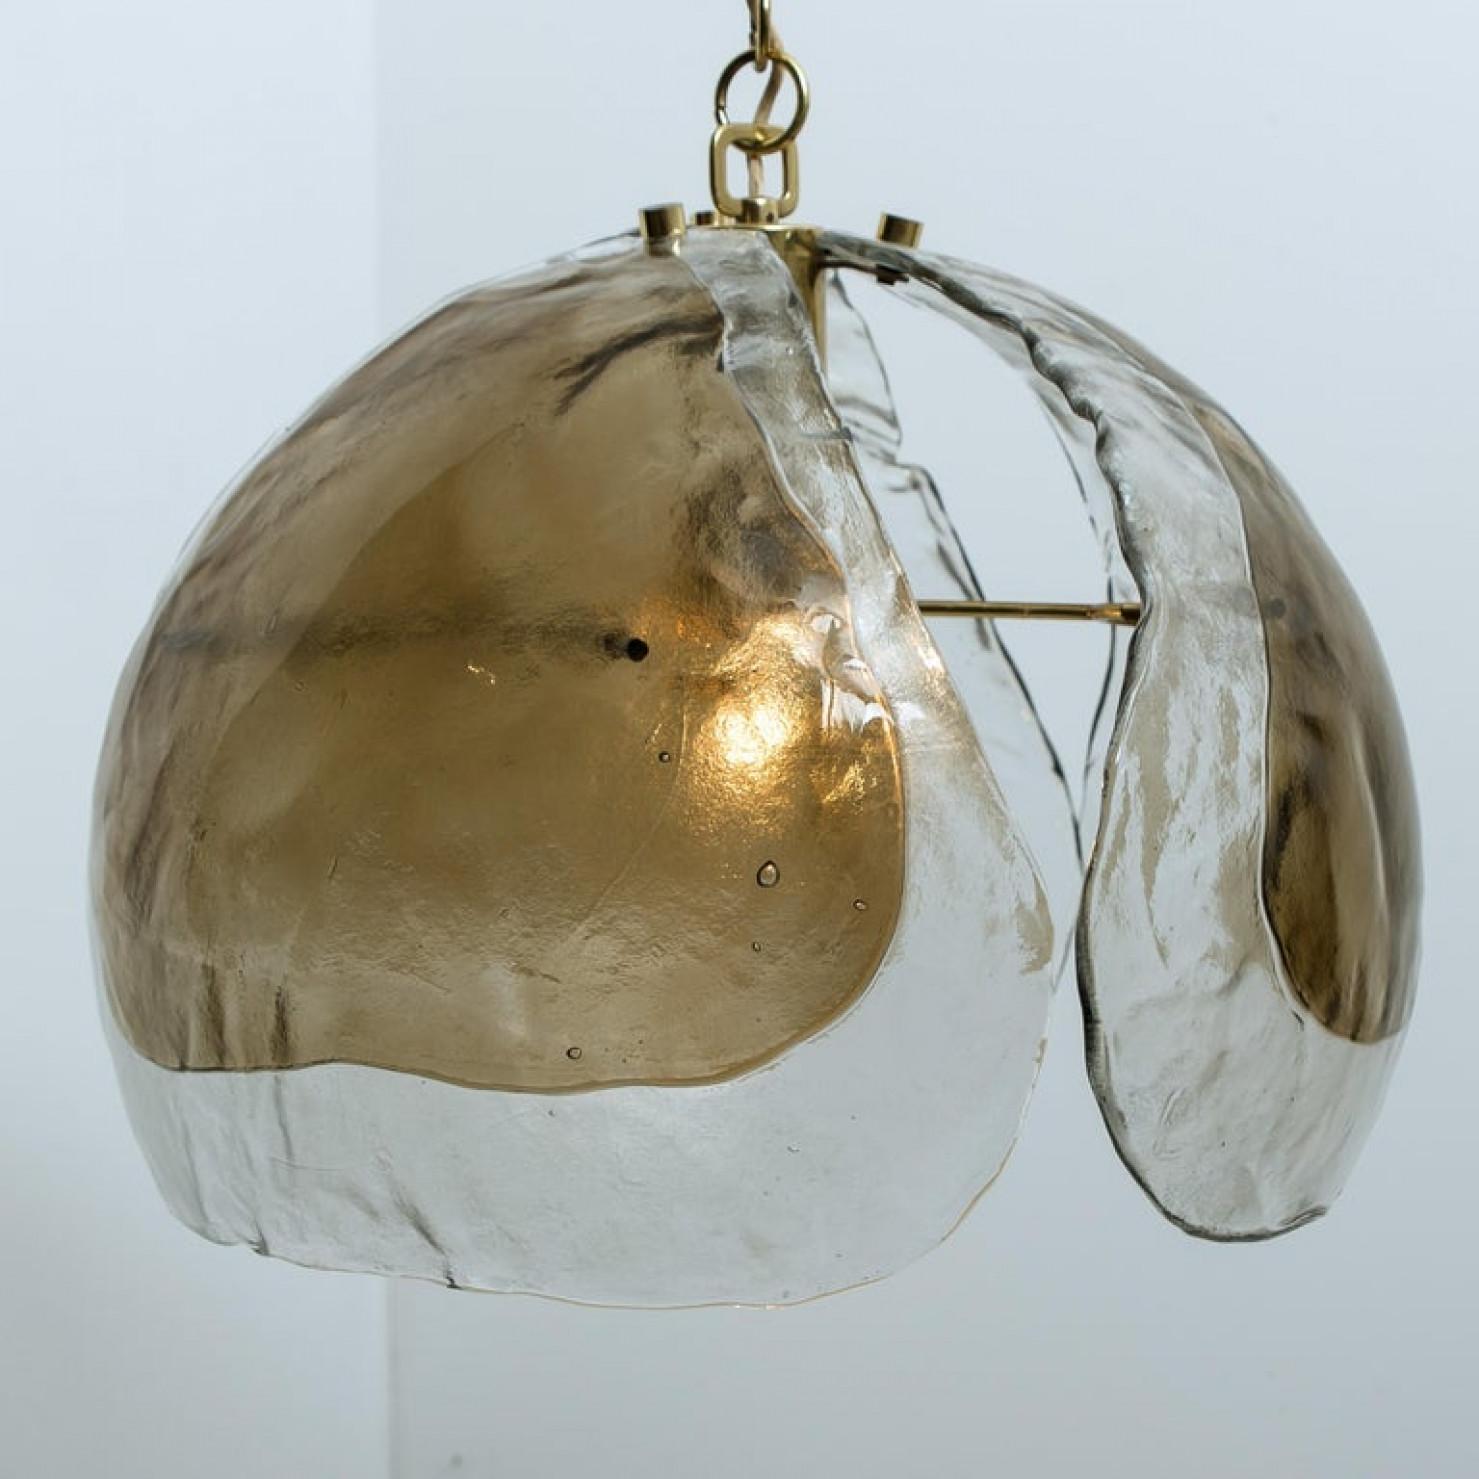 Pair of Murano Chandelier Pendant Lights, Amber Glass and Brass, 1970s For Sale 1